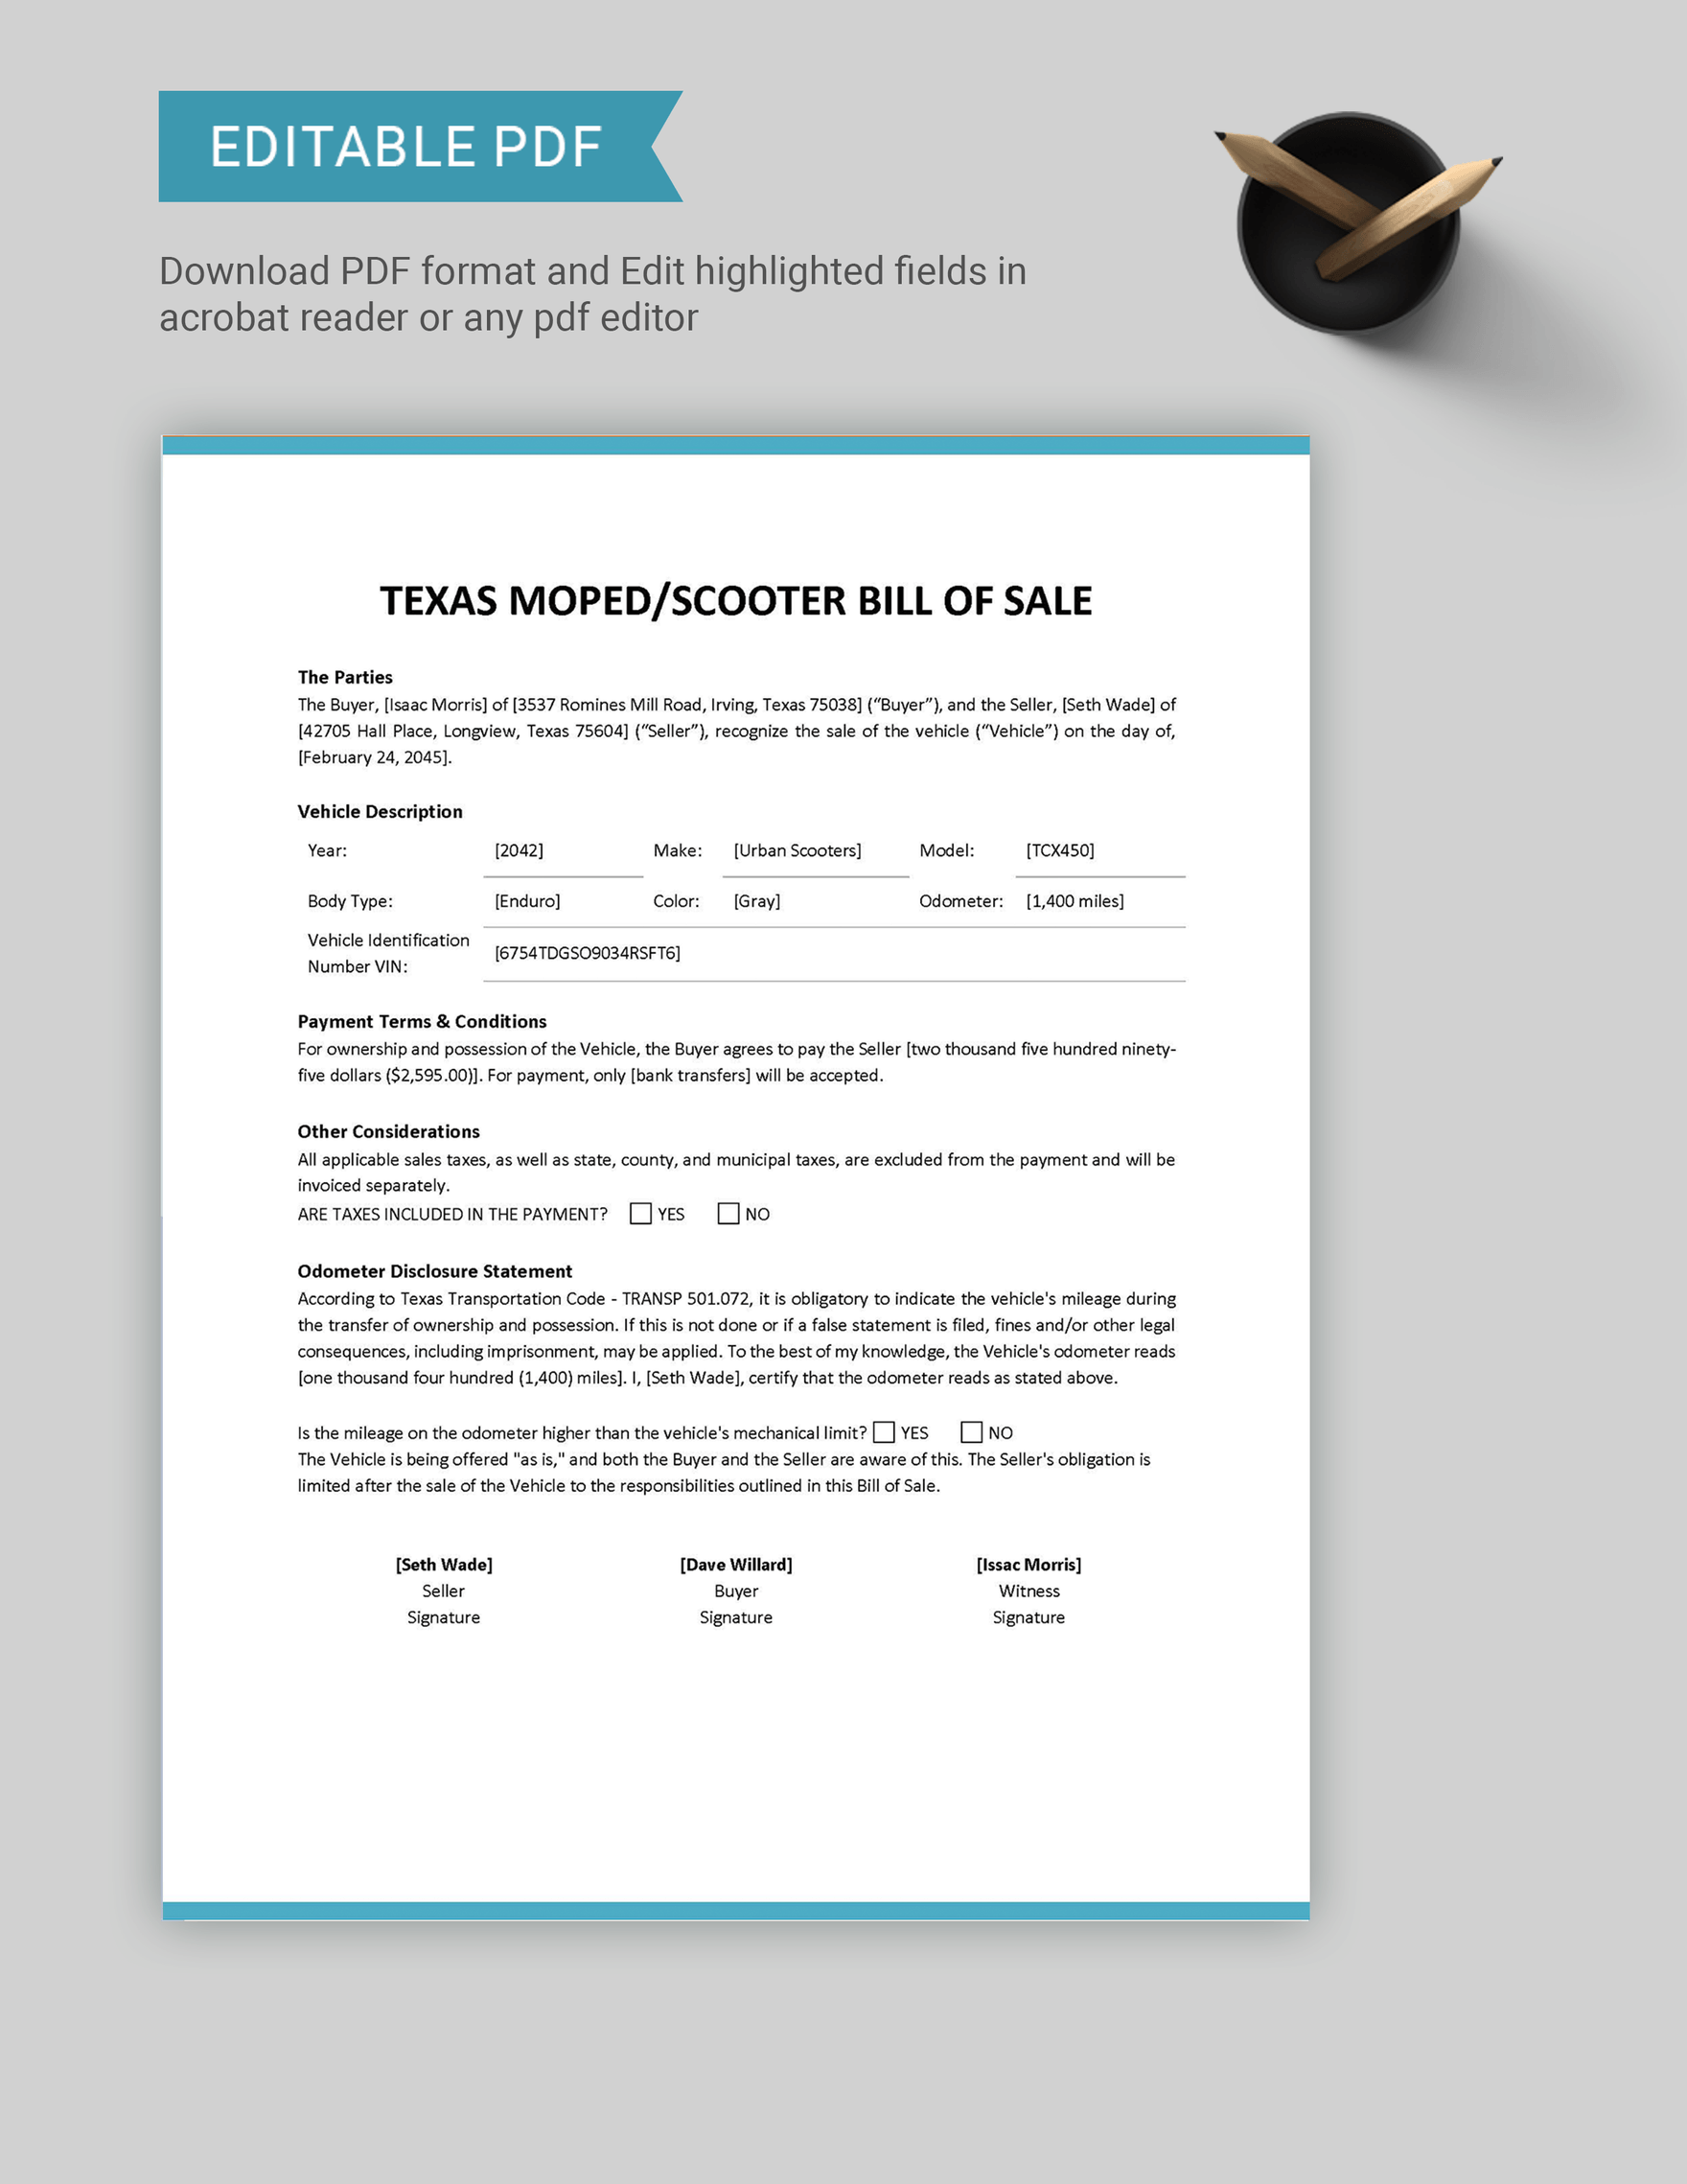 Texas Moped / Scooter Bill of Sale Template